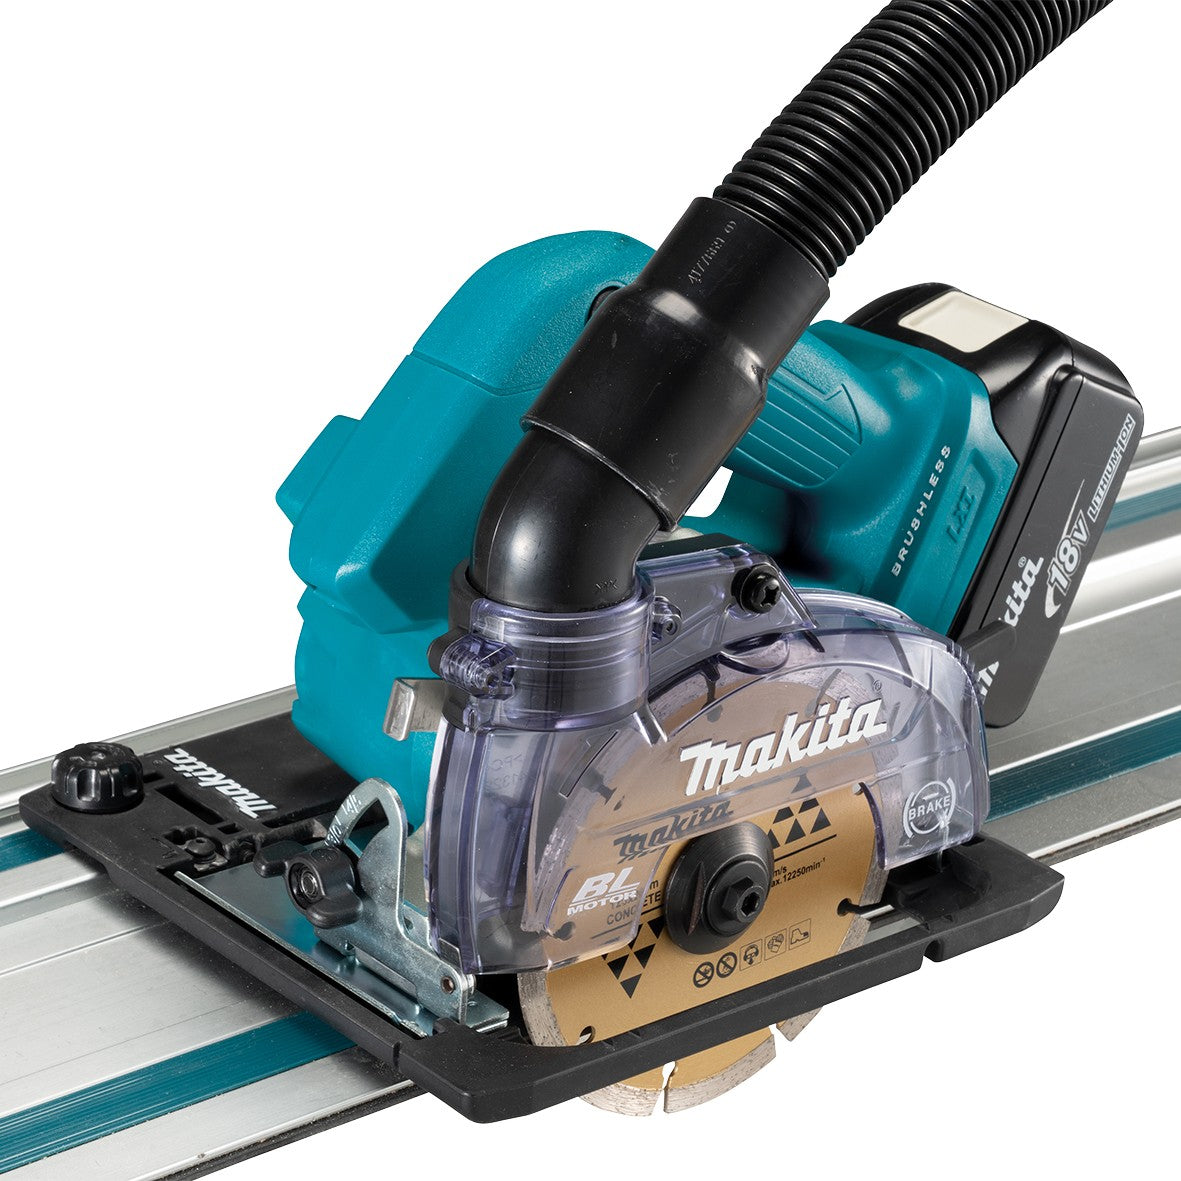 18V Brushless 125mm (5") Diamond Cutter DCC501ZX1 by Makita